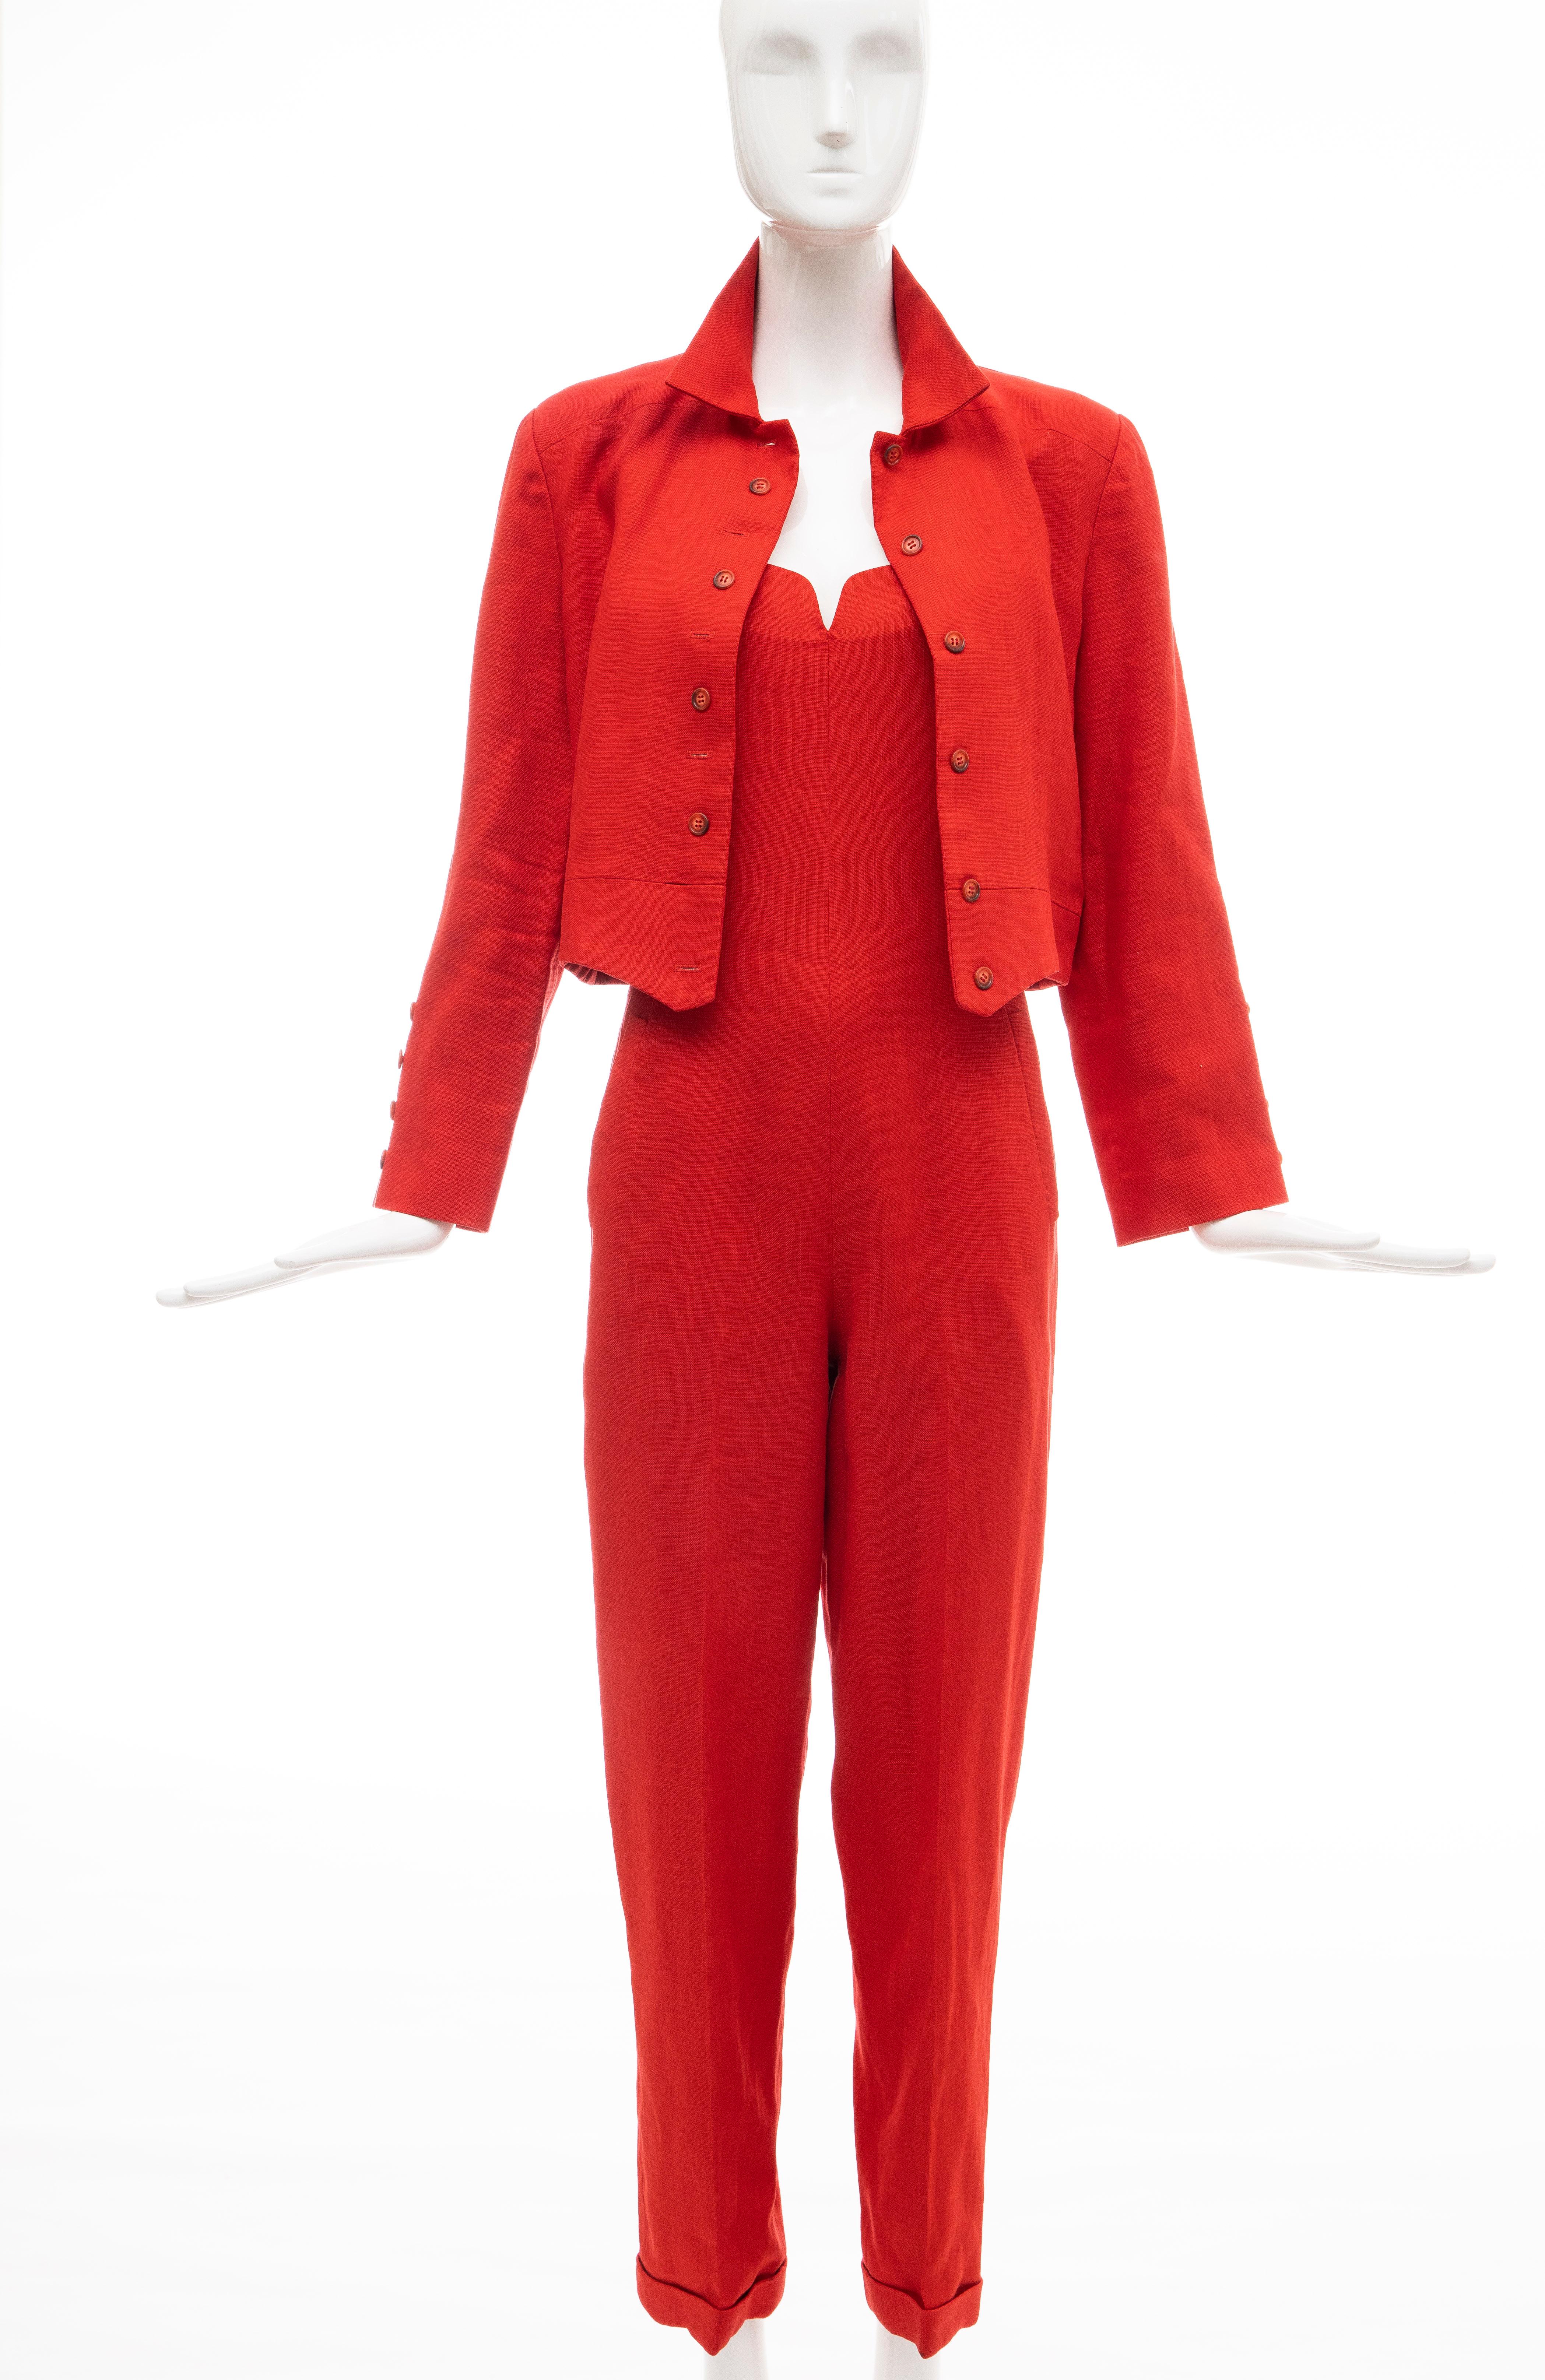 Geoffrey Beene, Circa:1970's red linen jumpsuit with two front pockets, back zip & hook-and-eye closure and fully lined in silk. Button front jacket fully lined in red silk with black polka dots.

US. 8
Jumpsuit: Bust: 33, Waist: 30, Hip: 38,